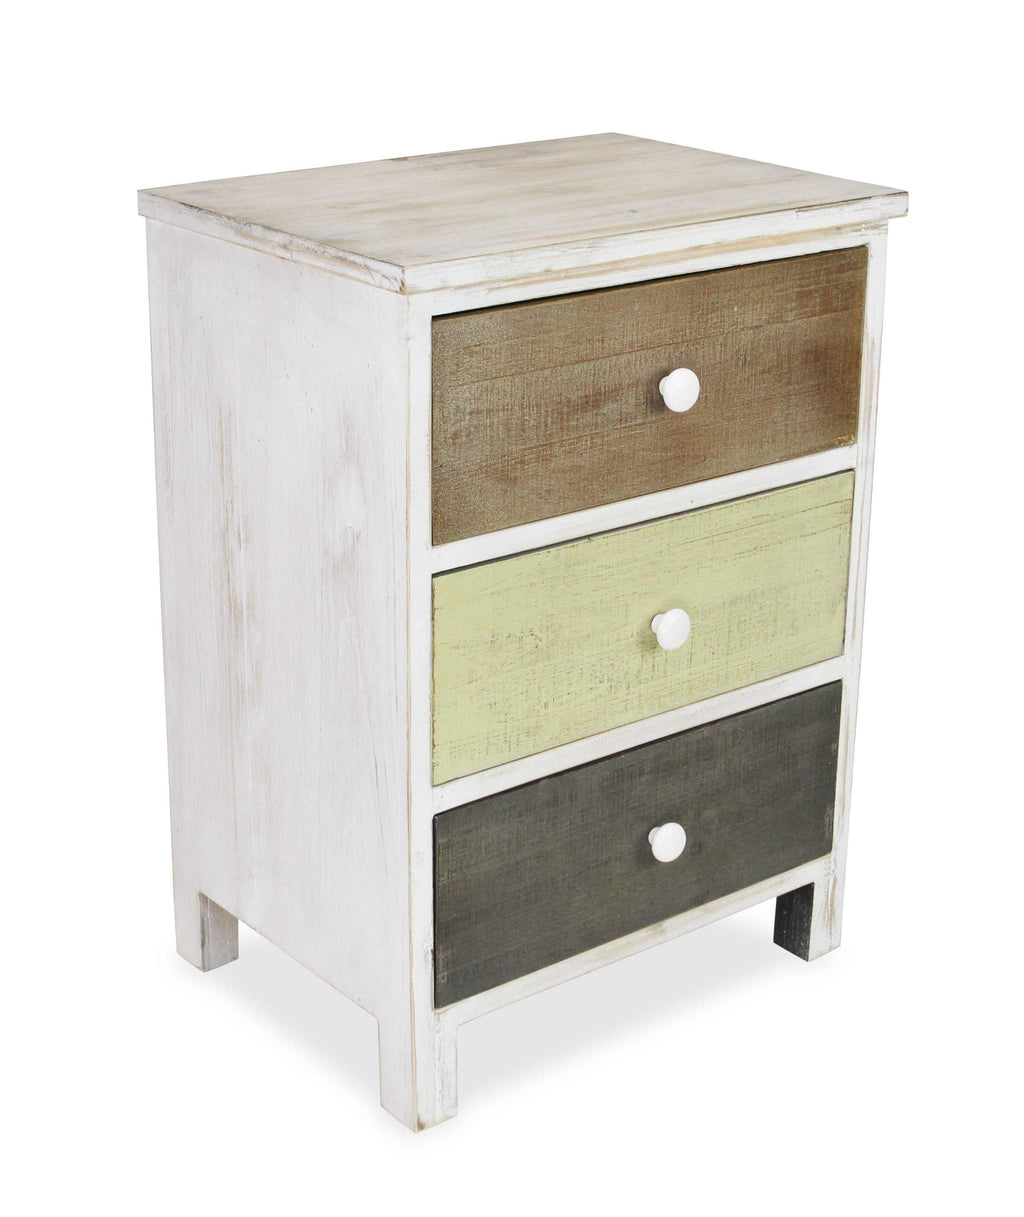 Distressed Gray And White Side Cabinet With 3 Drawers - 99fab 